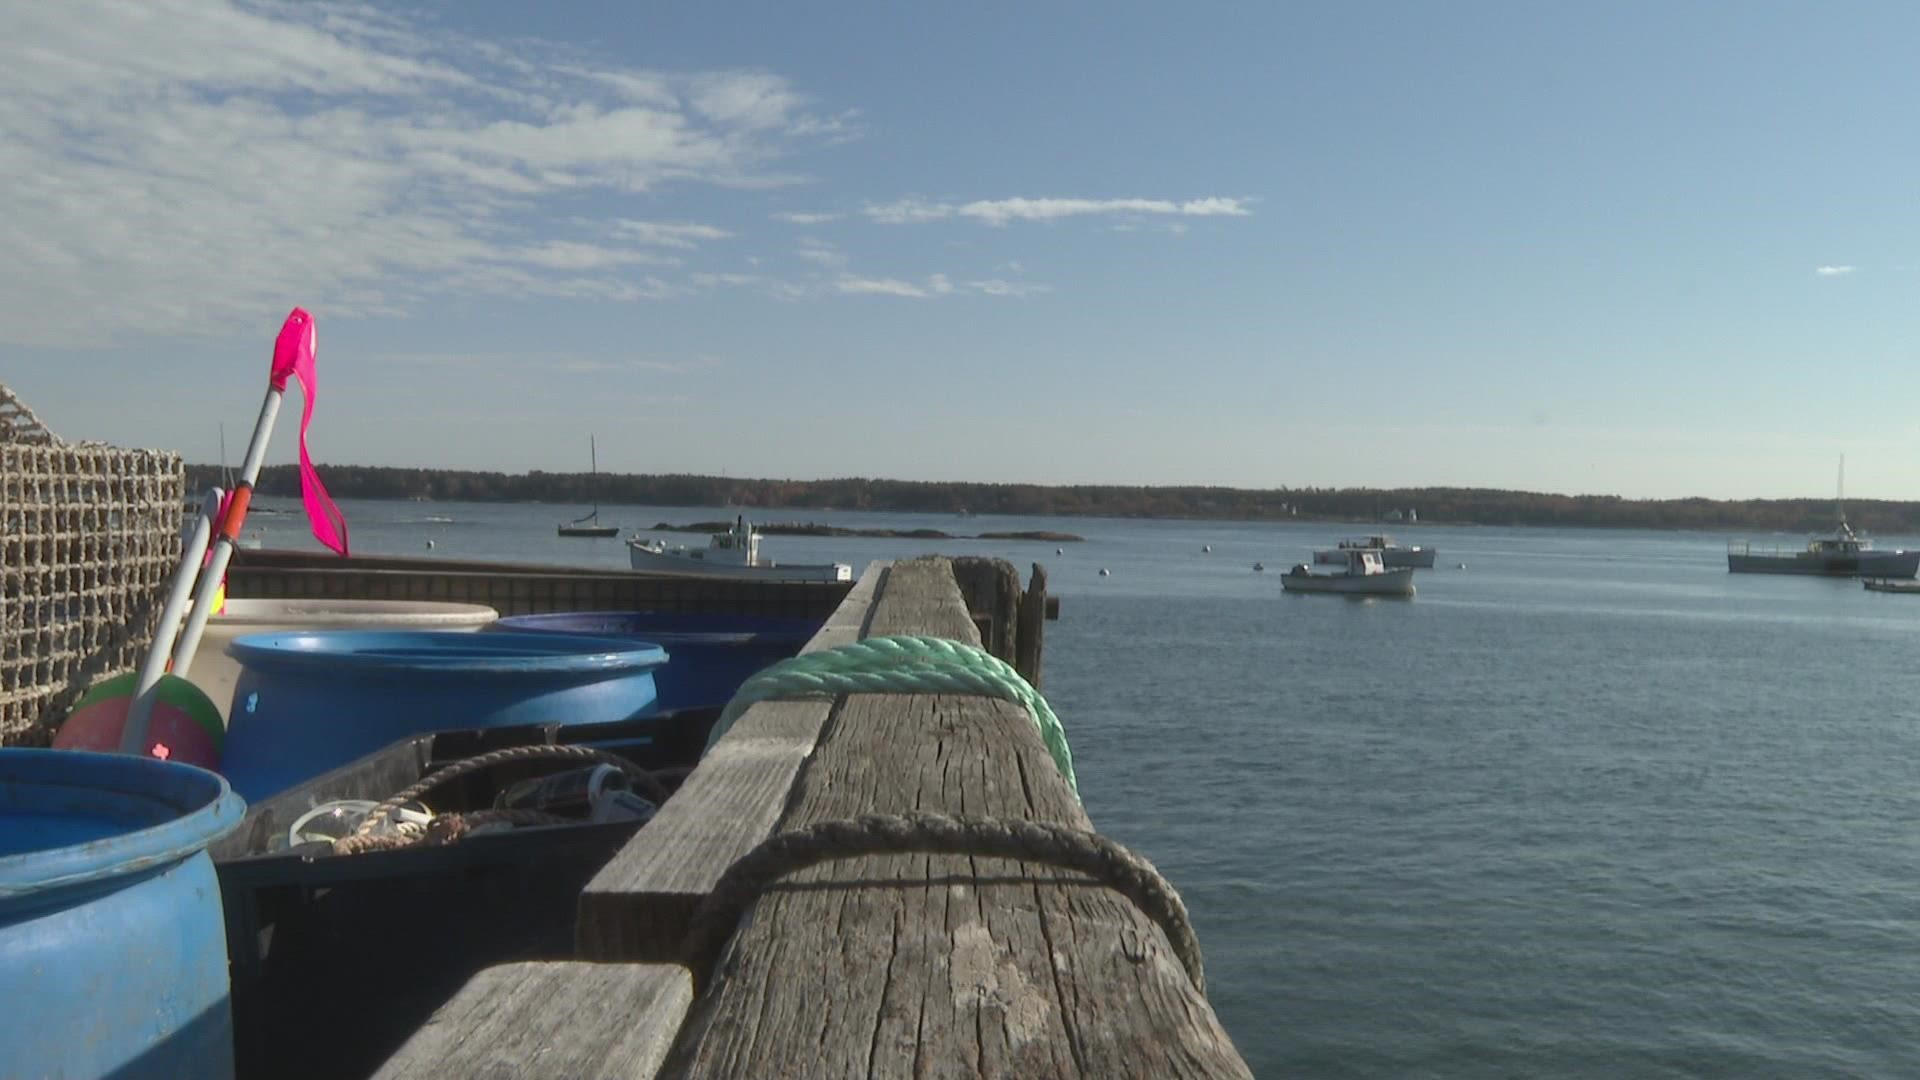 The suspension of the Gulf of Maine lobster fishery's certificate will go into effect on Dec. 15.